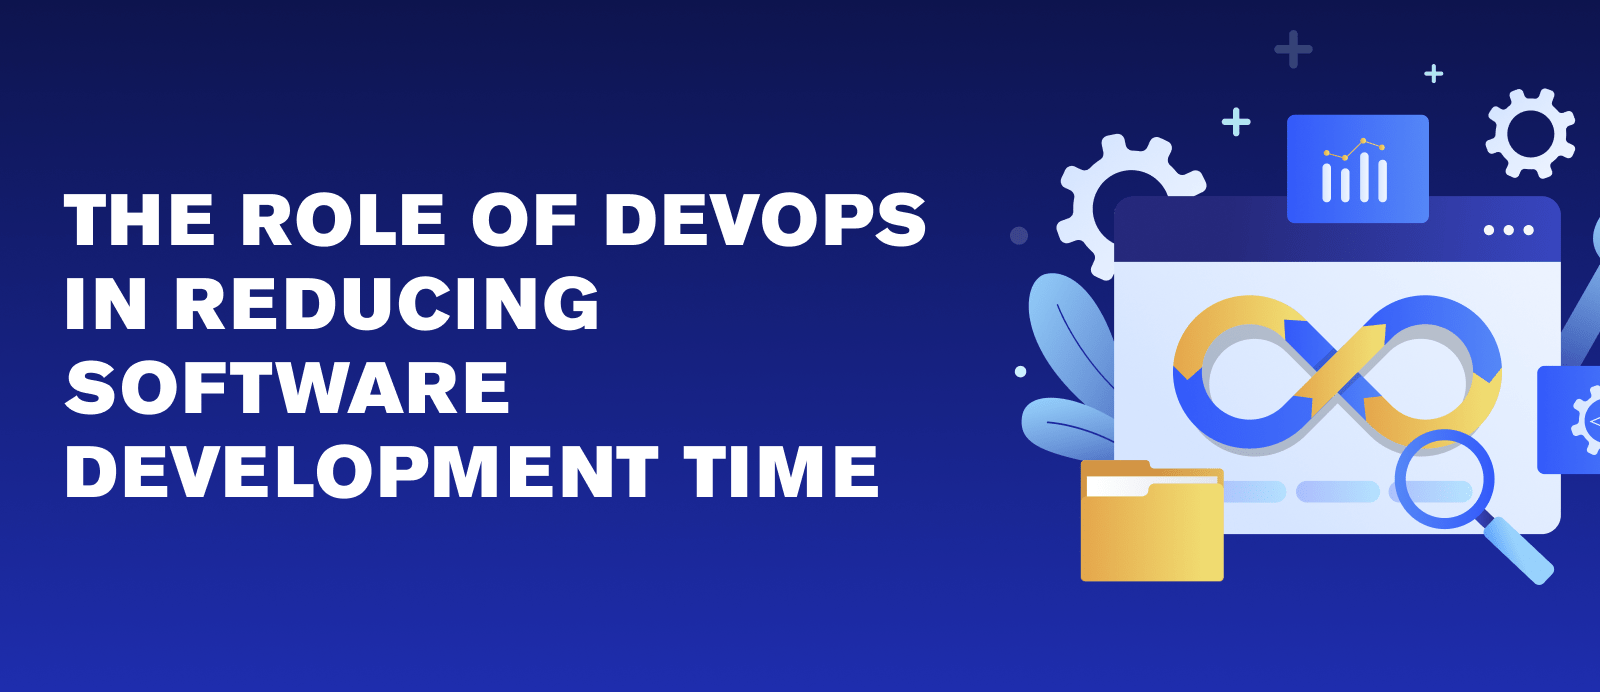 The Role of DevOps in Reducing Software Development Time